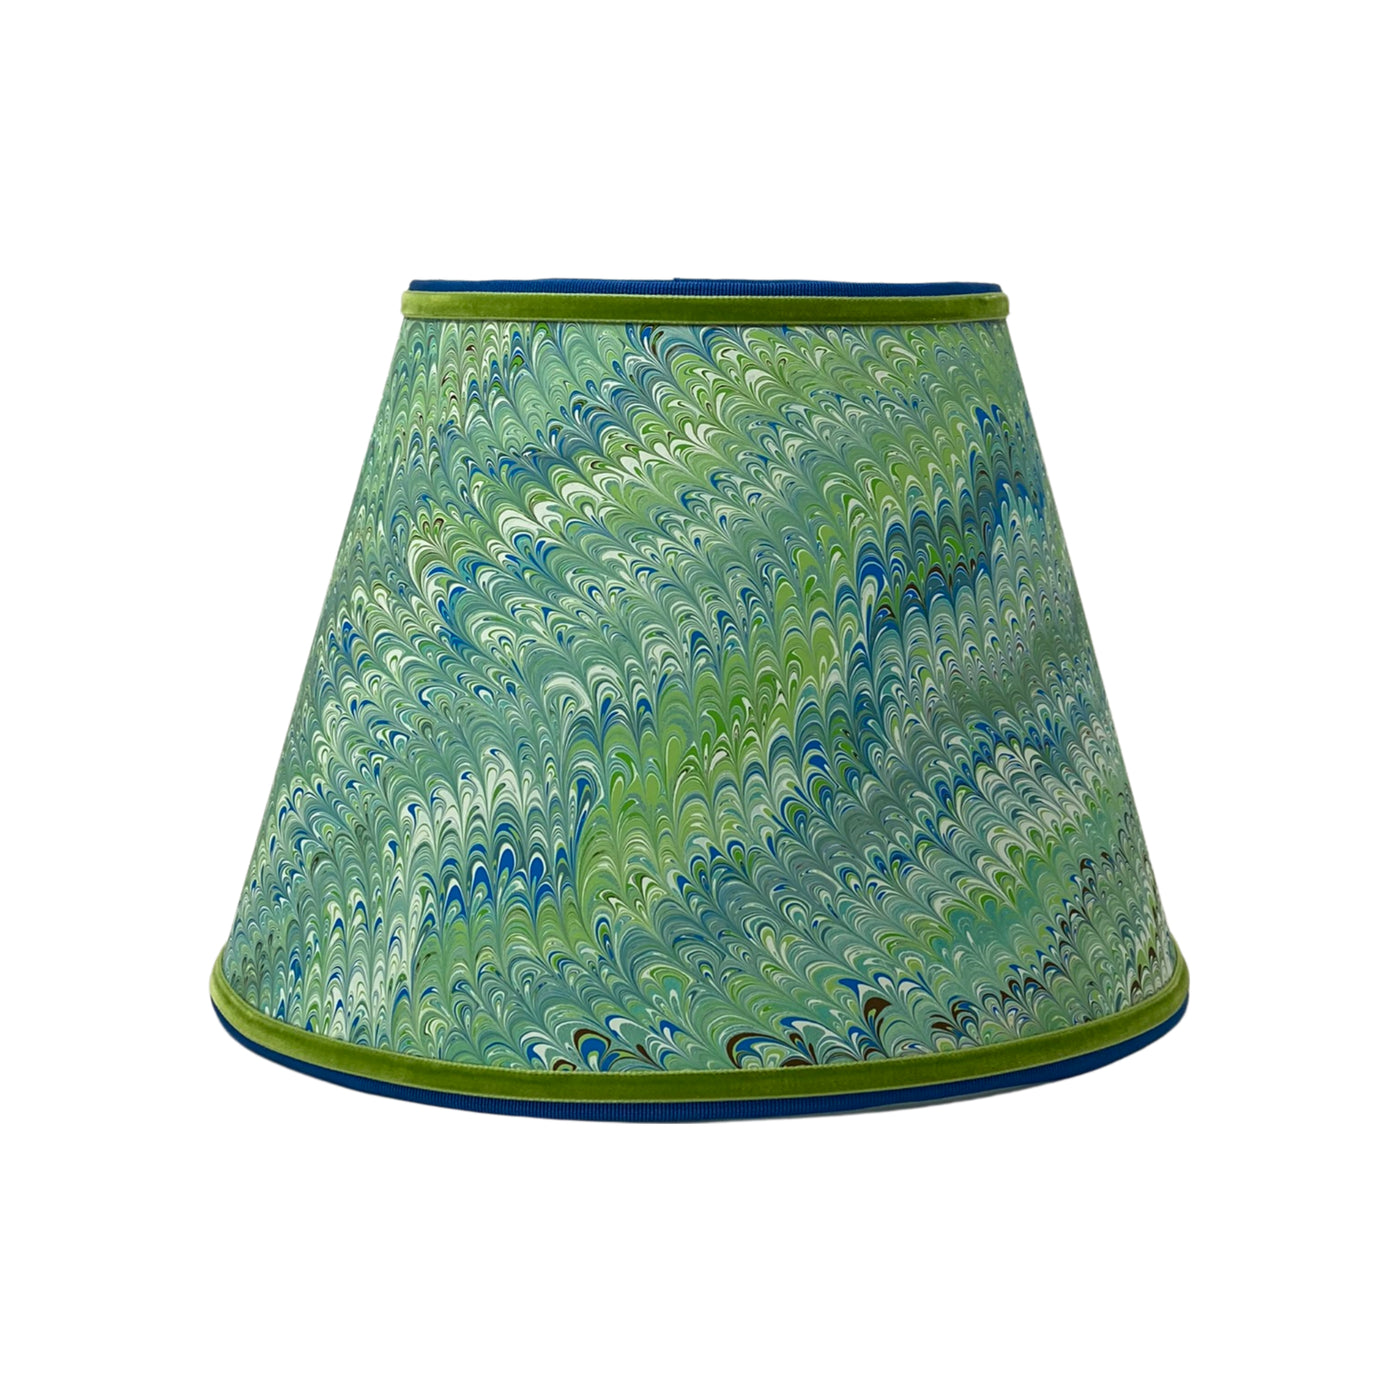 Marbled Lampshade